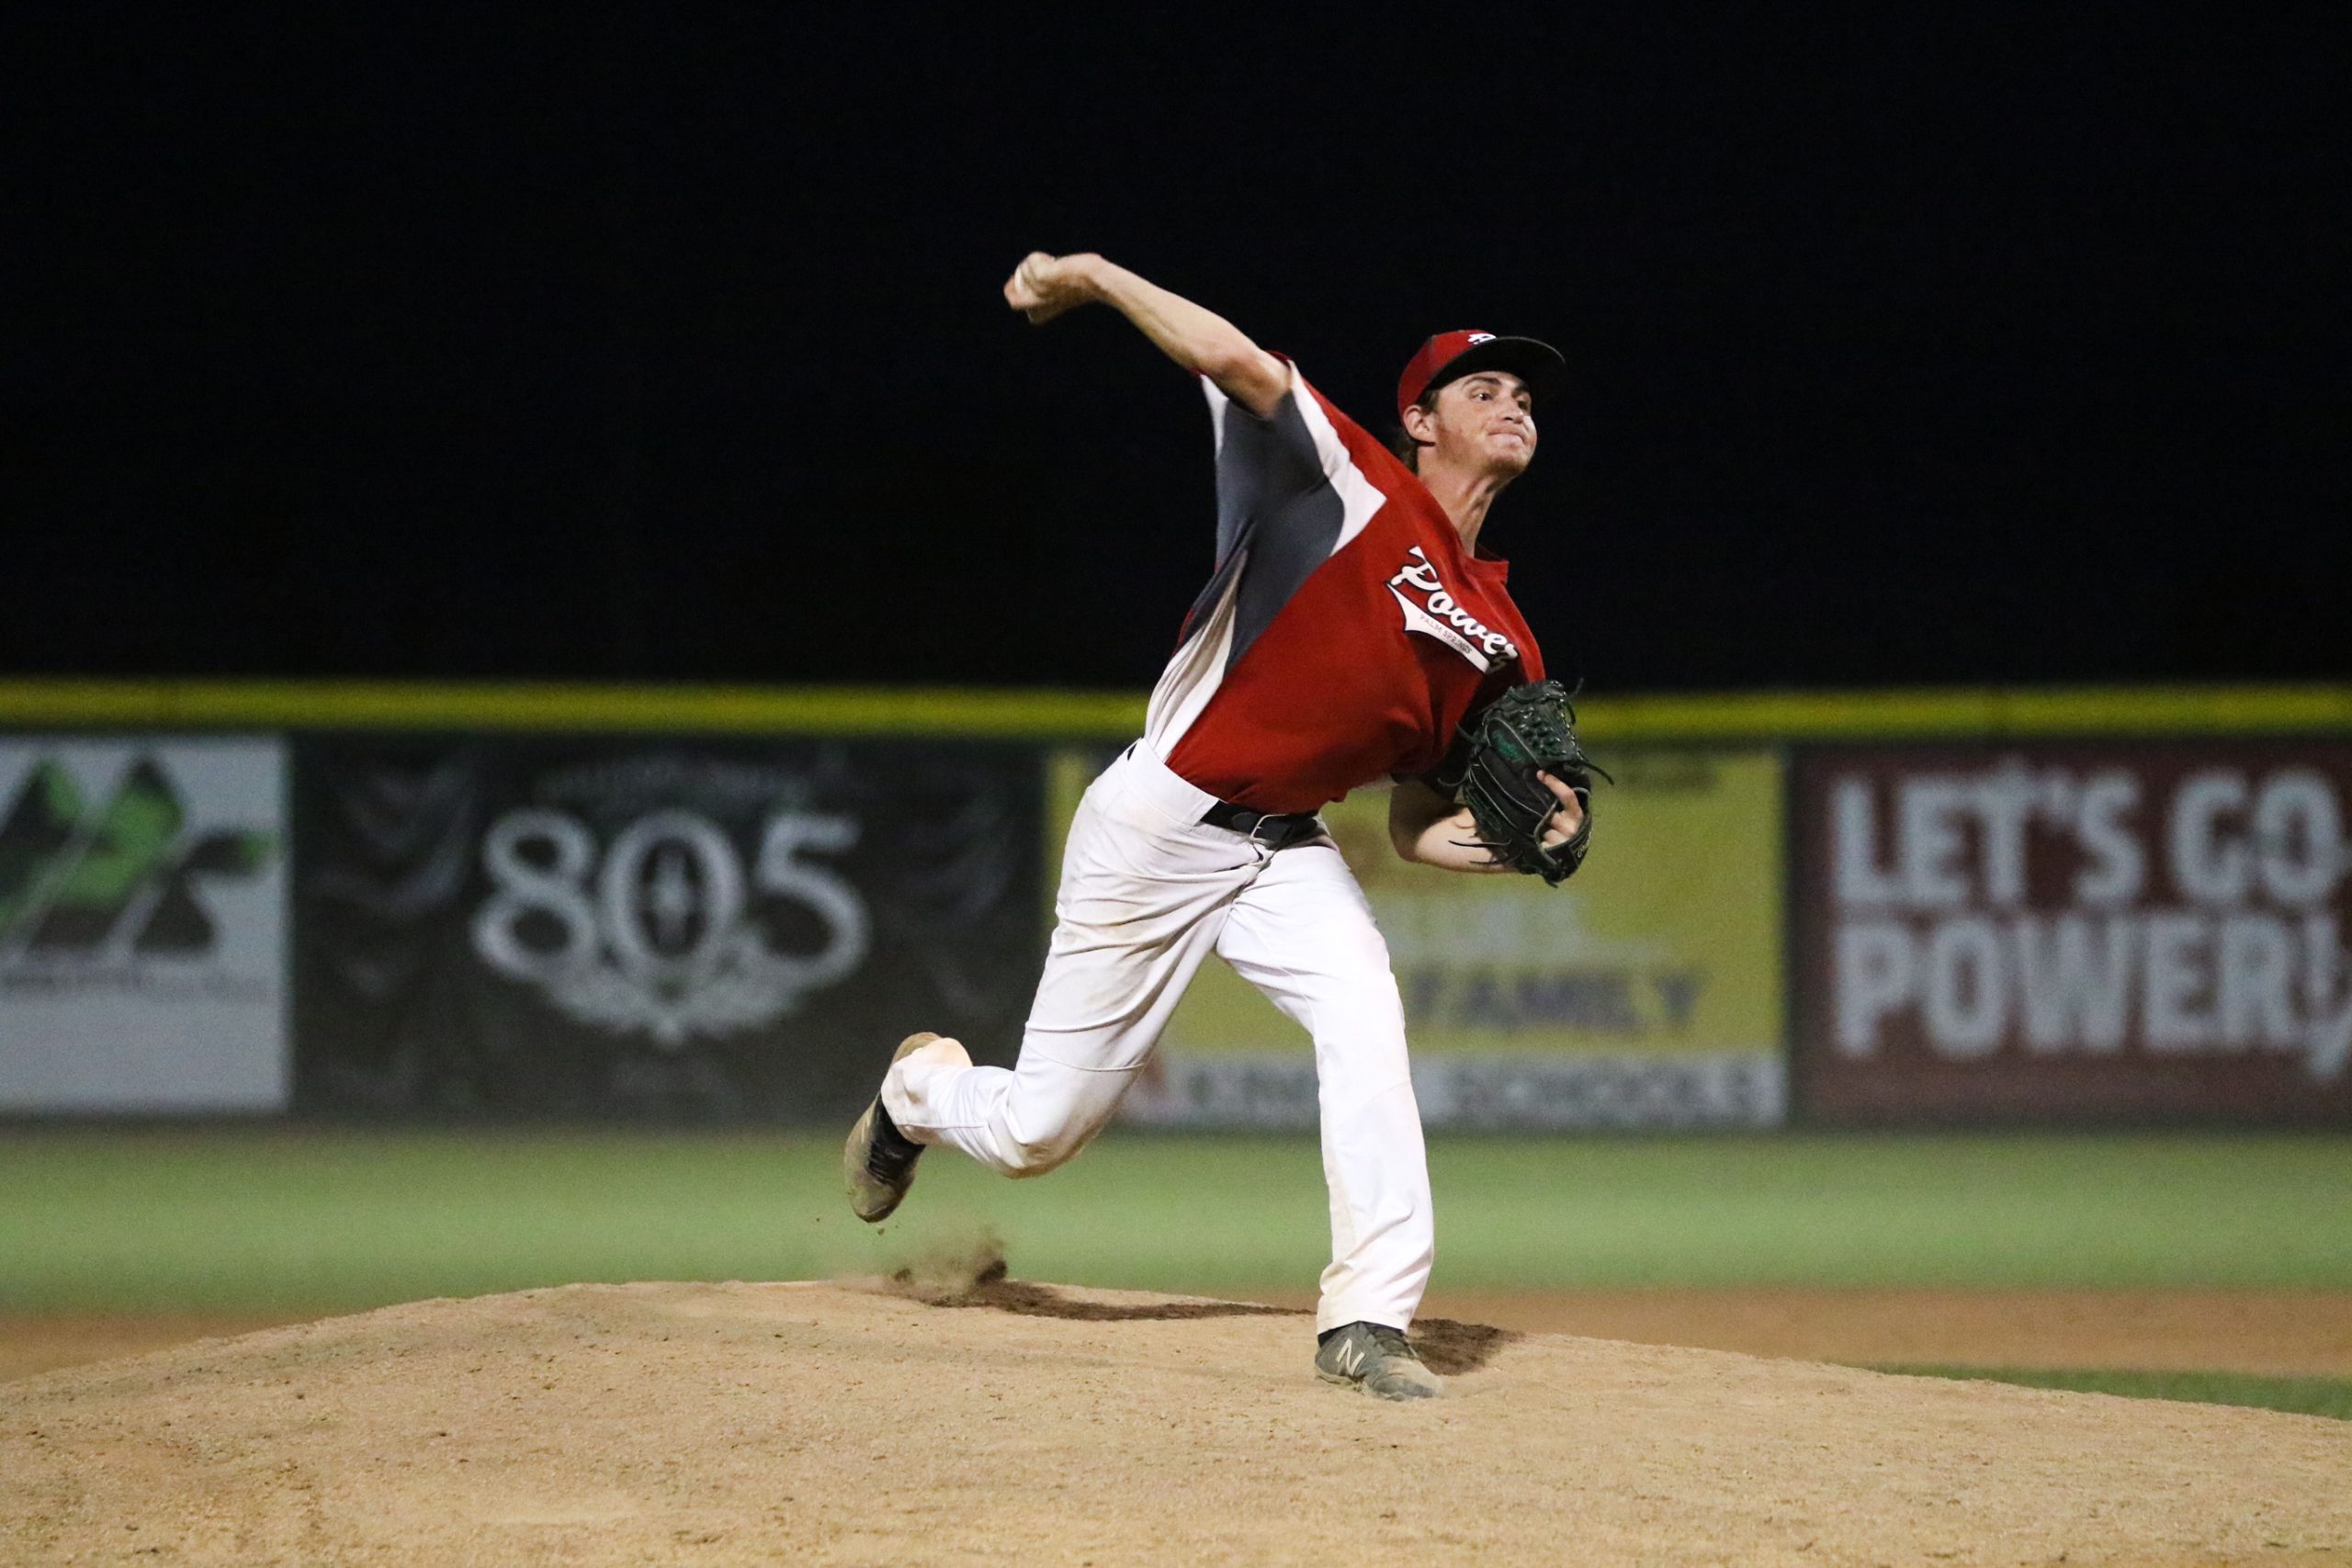 Force not POWER-ful Enough, Palm Springs Wins 5-1